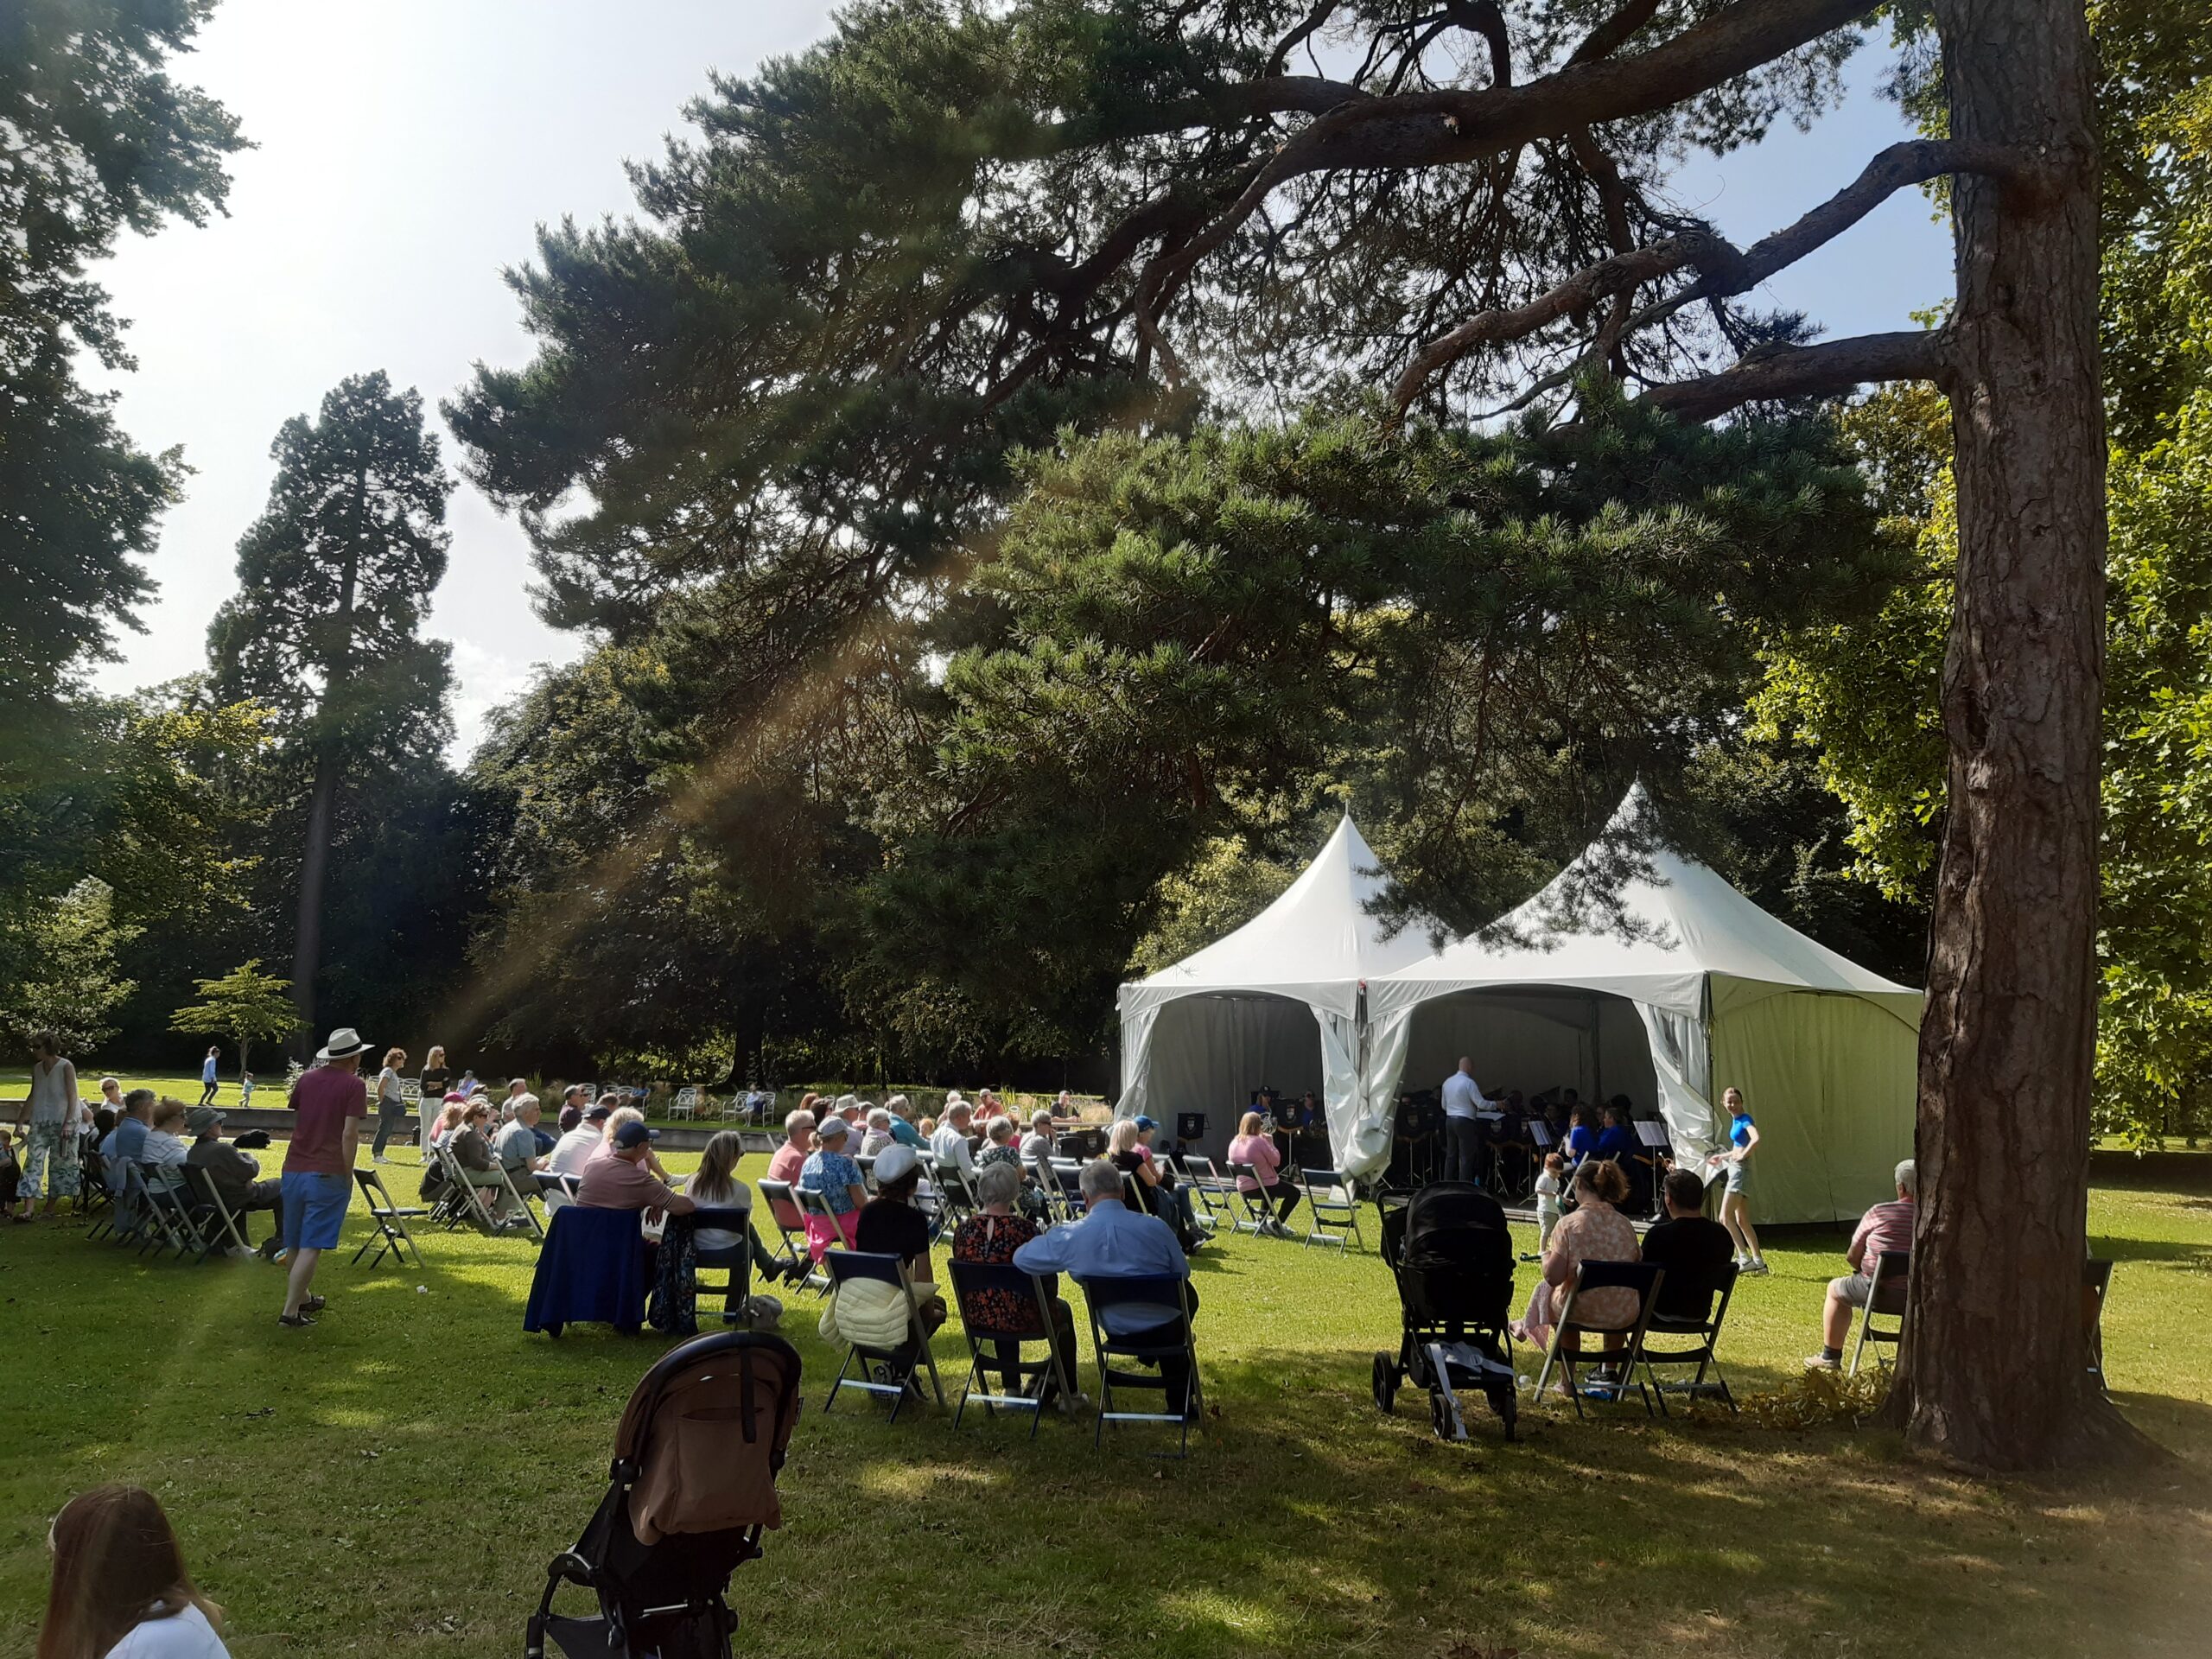 Brass band in white tent entertaining visitors on lawn surrounded by mature trees.